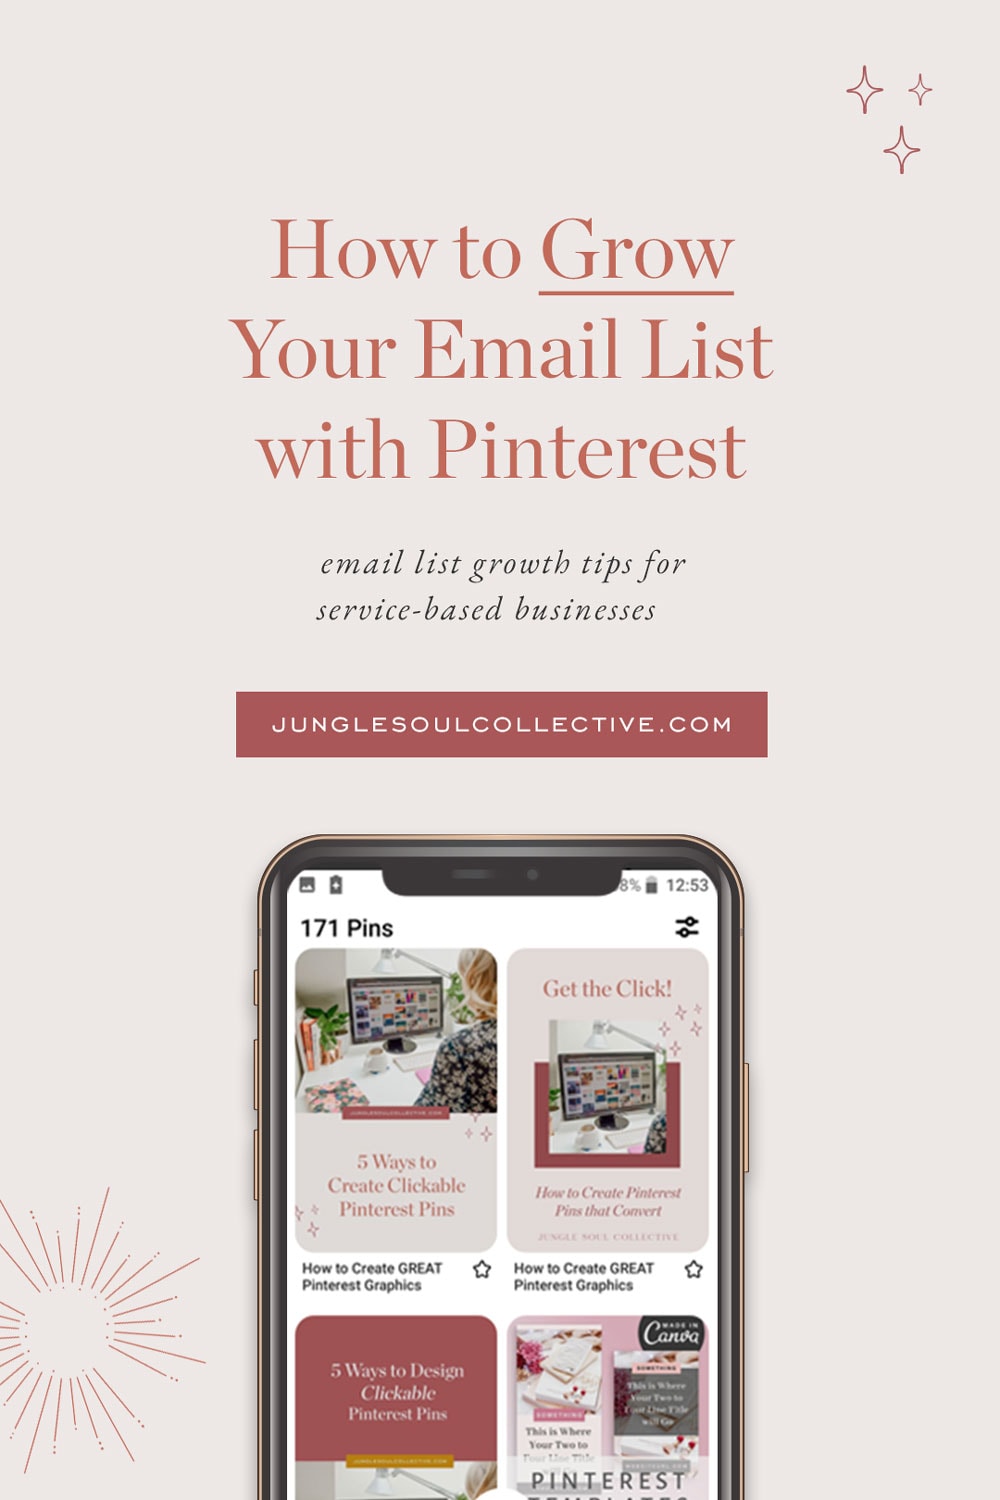 Using Pinterest to Grow Your Email List